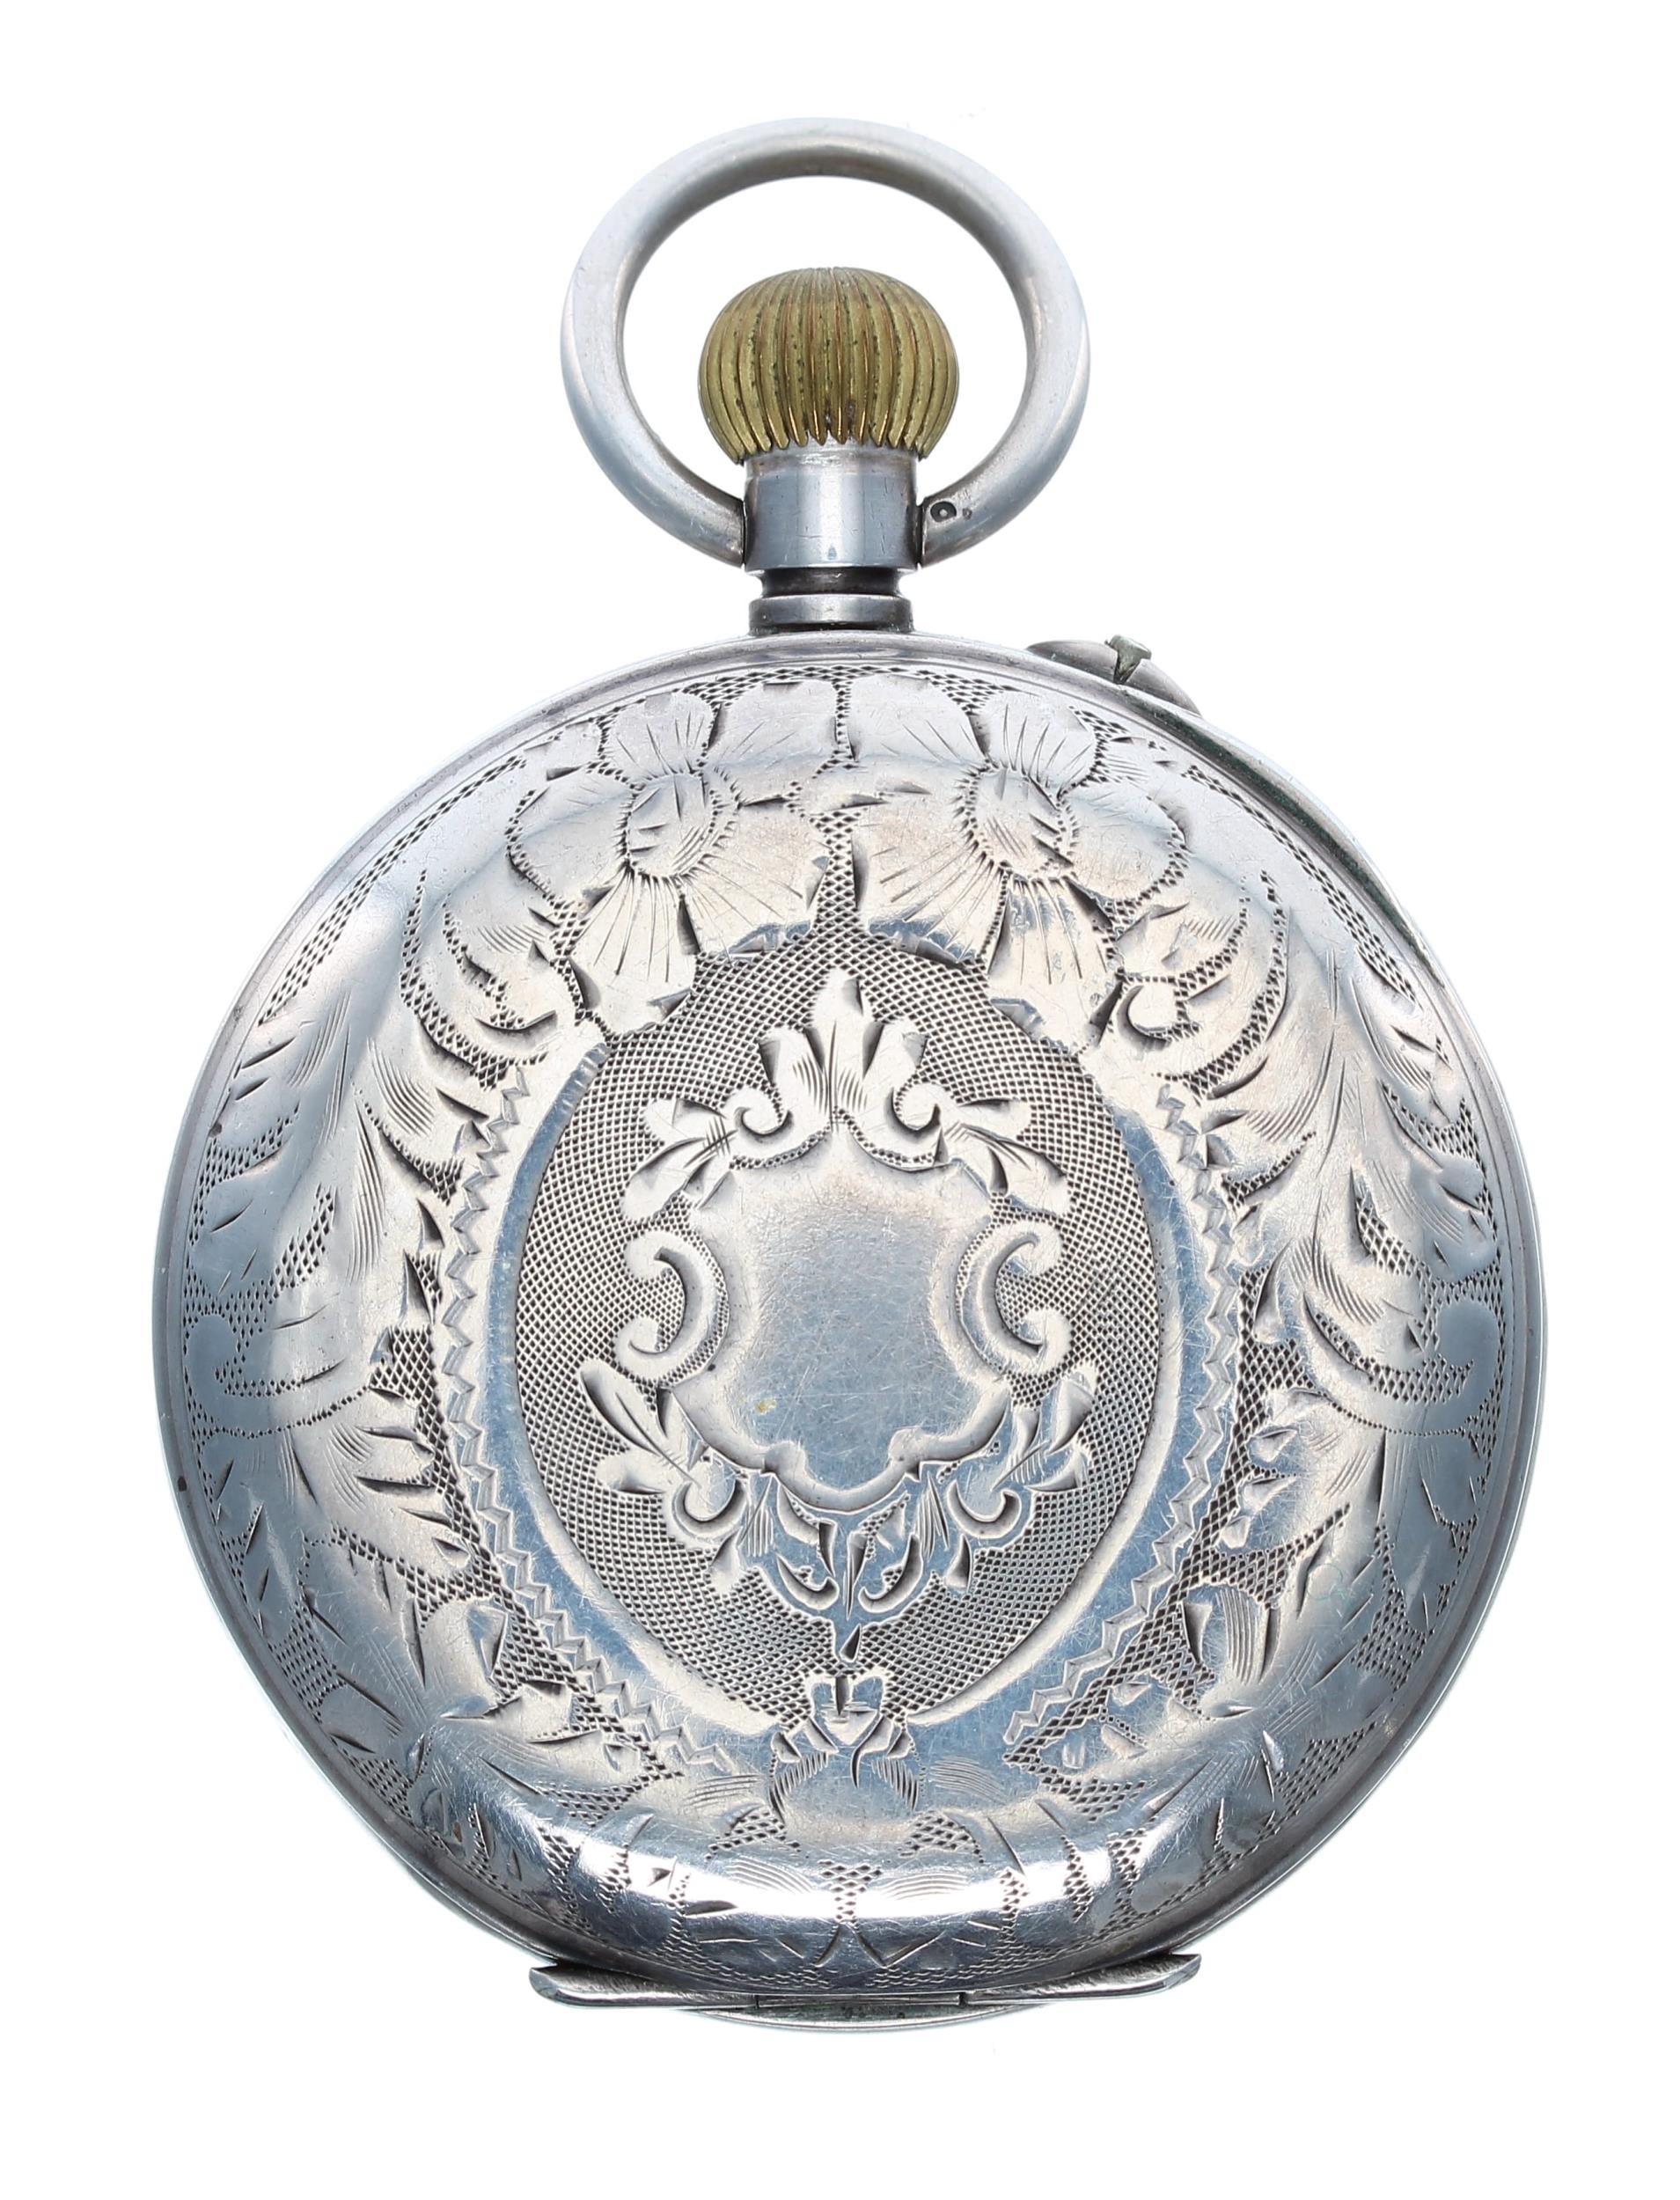 Hebdomas Patent 8 days silver pocket watch, import hallmarks London 1912, the decorated dial with - Image 4 of 4